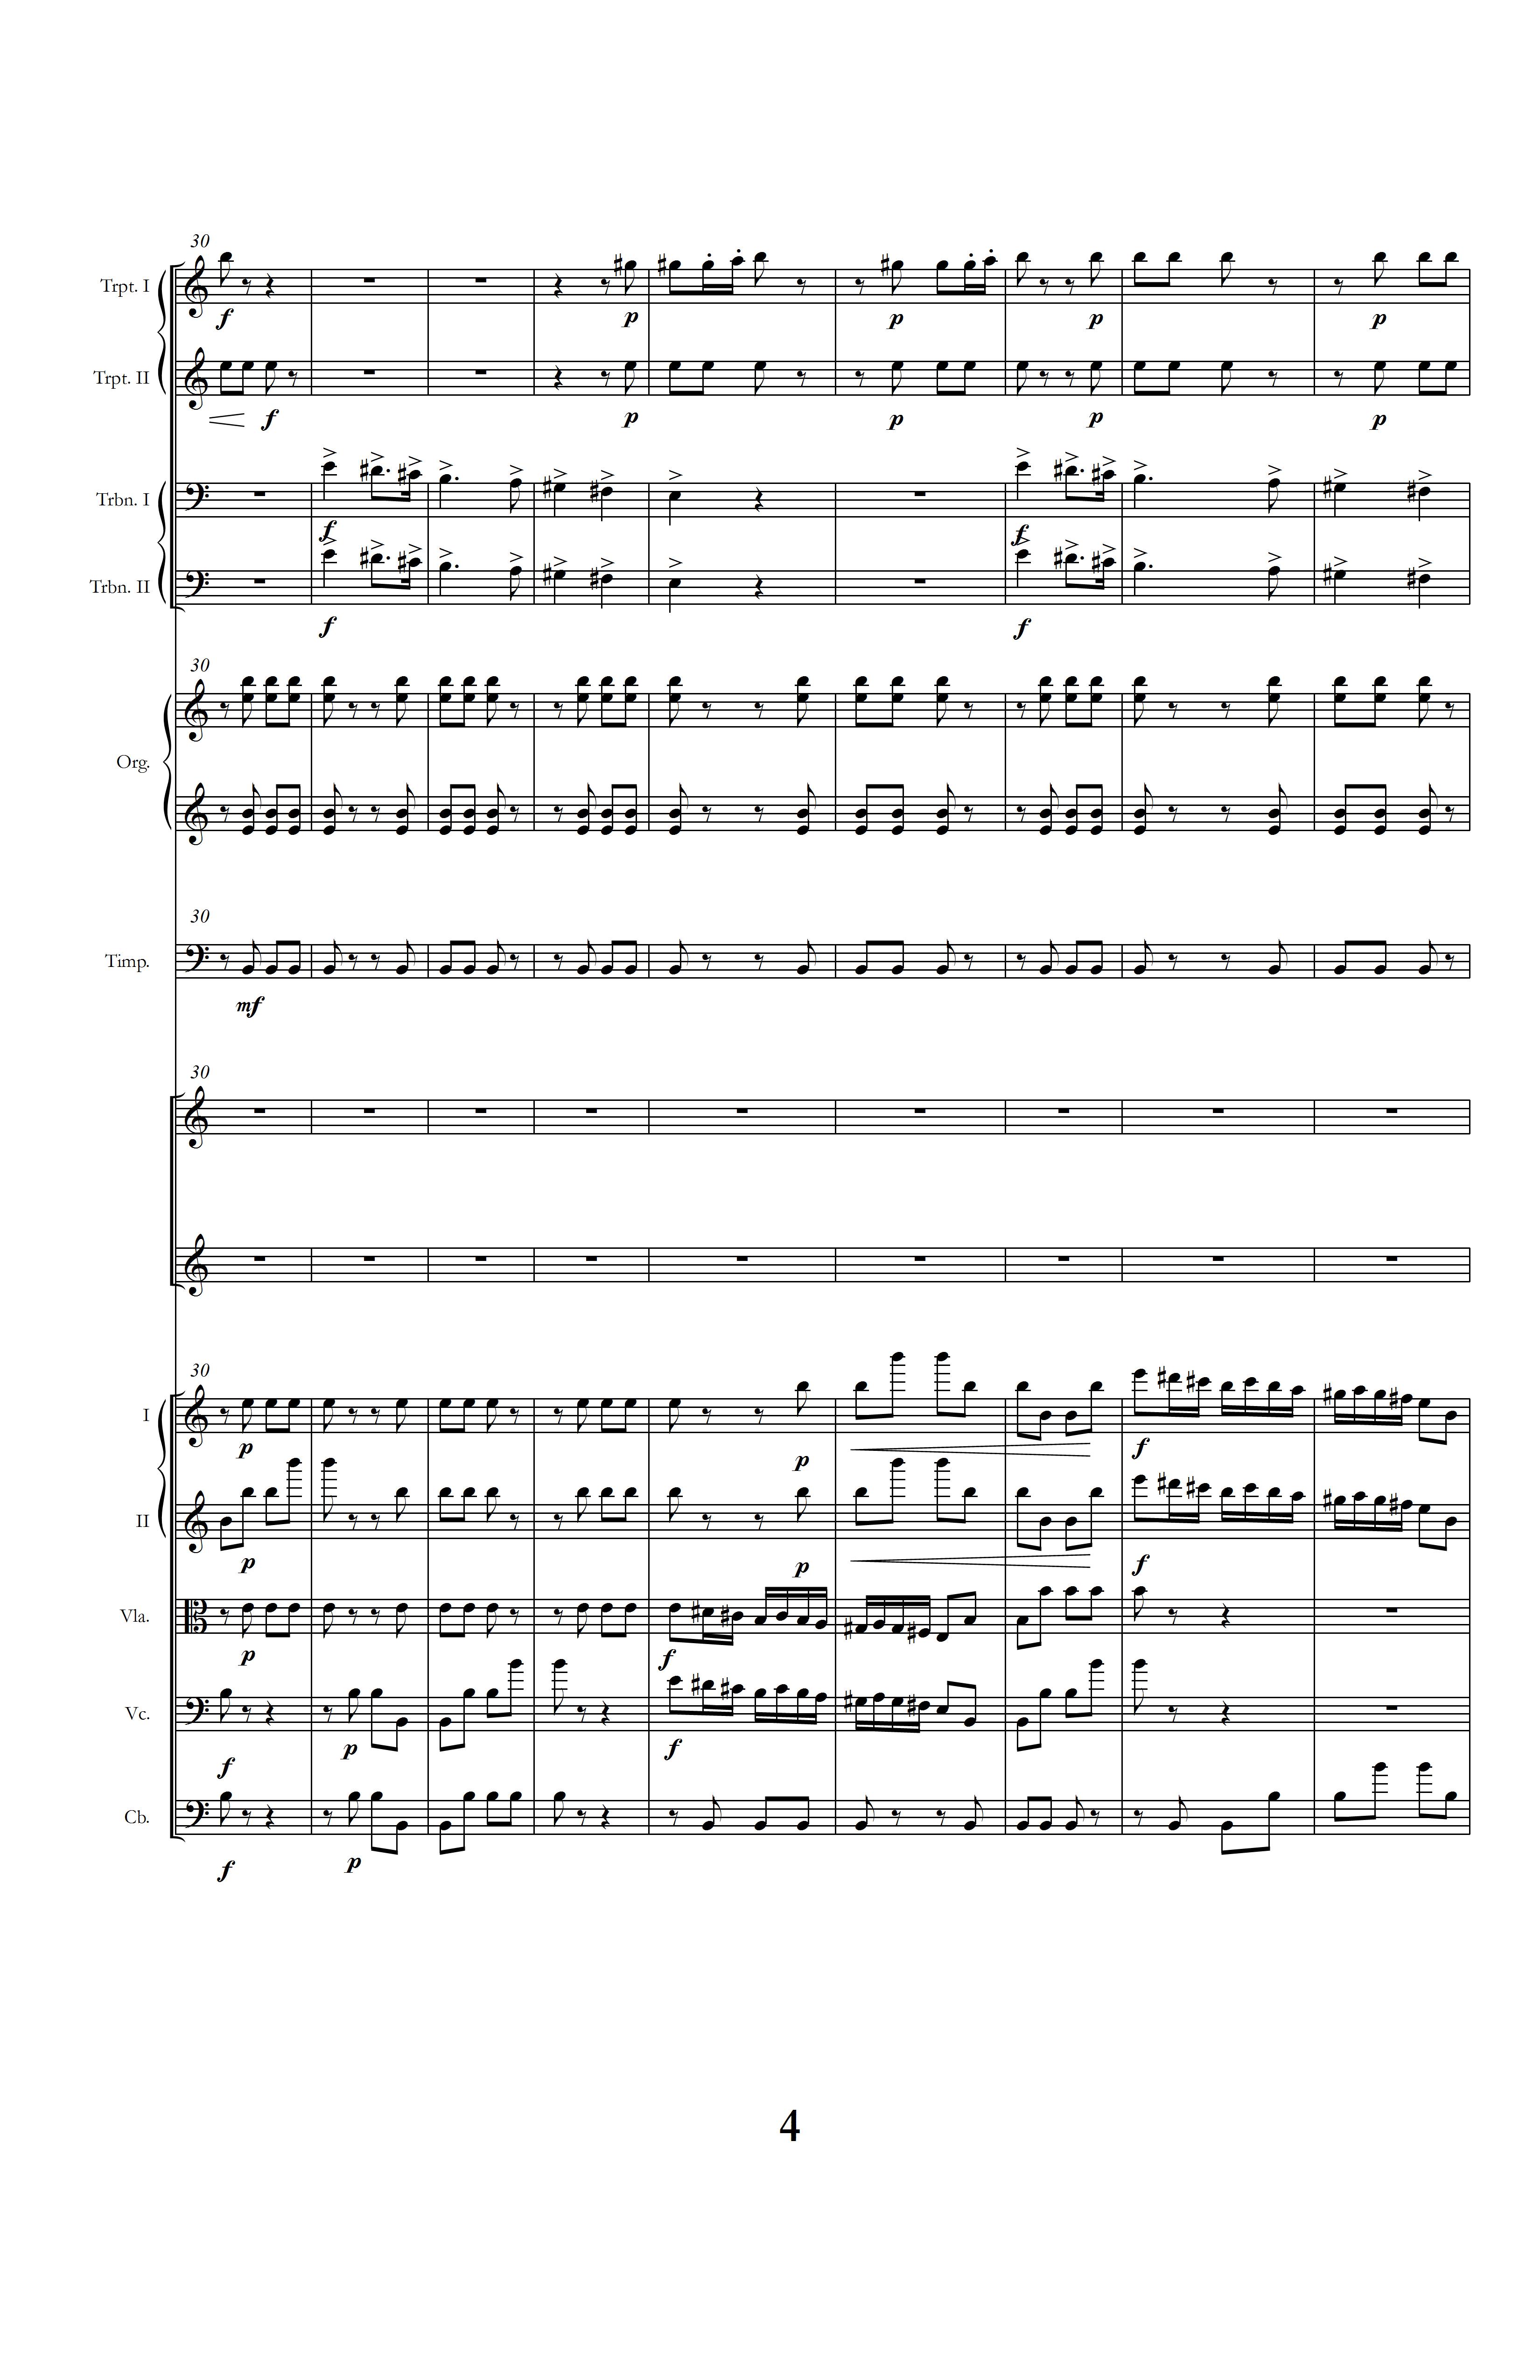 "Joy to the World! (ANTIOCH)" score, page four